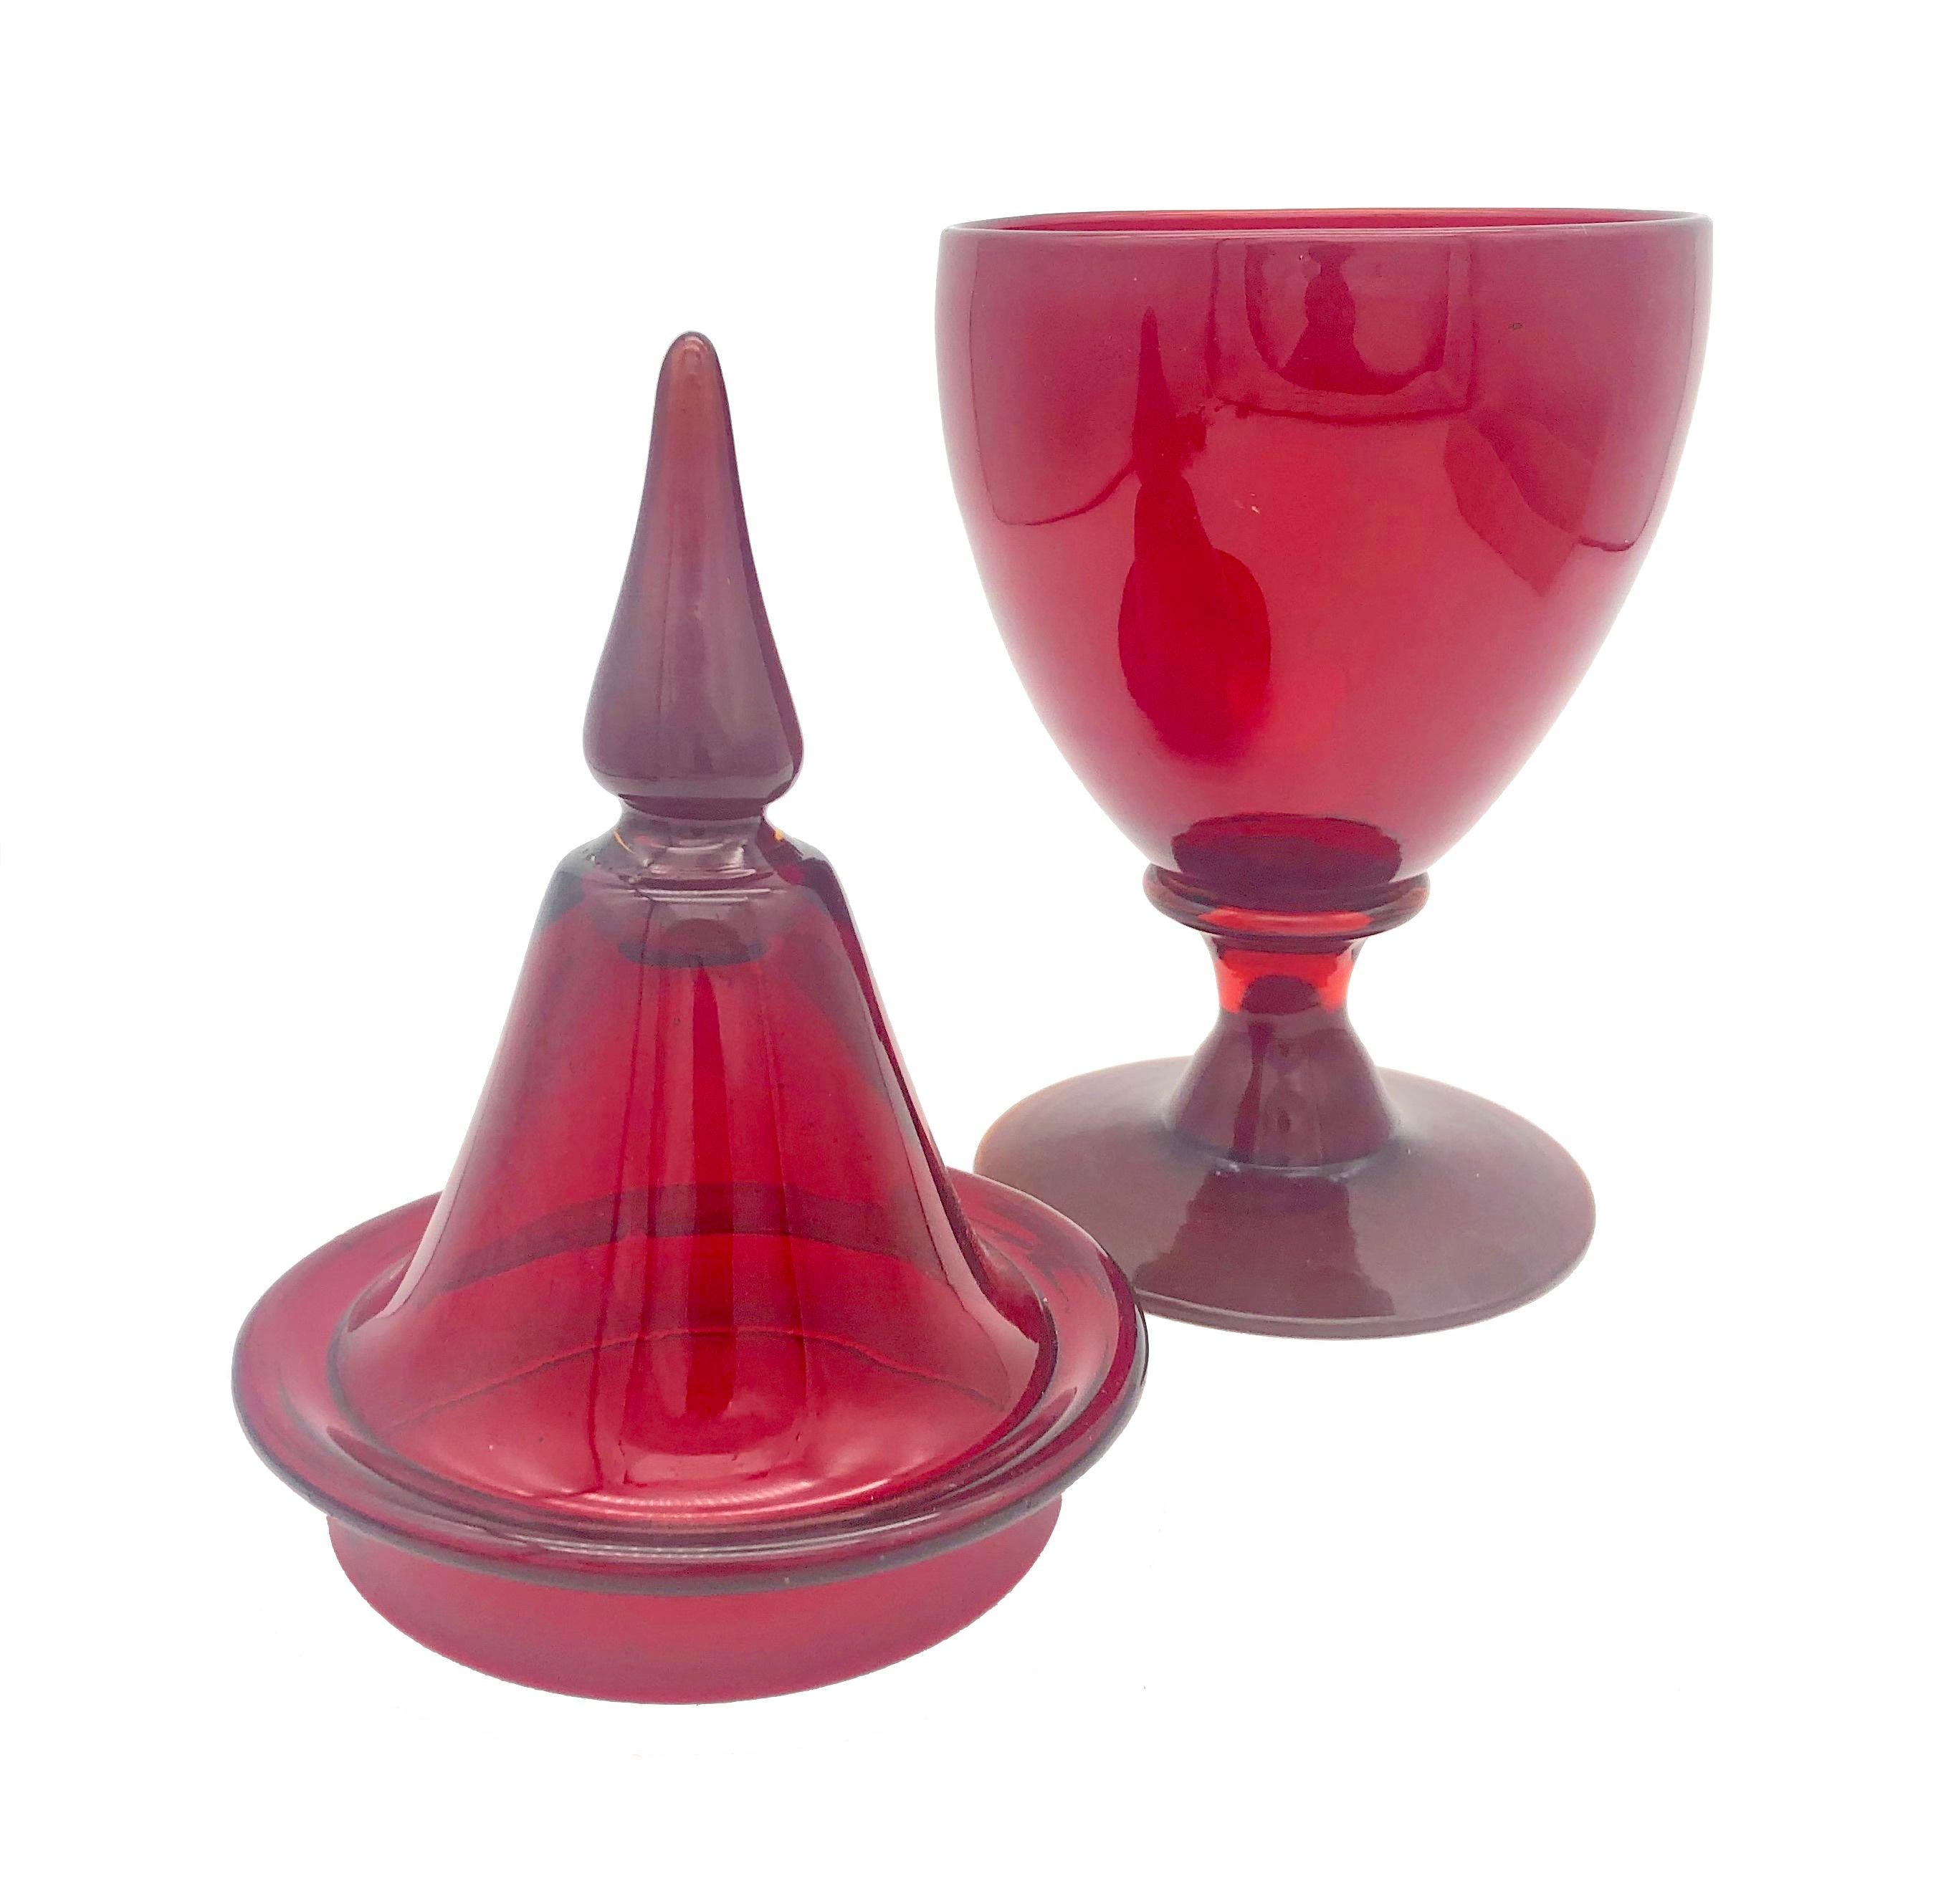 This intense red glass jar with its ornamental lid was hand blown in France in the middle of the 20th century. The fabulous red of this elegant bonboniere gives a festive look to any table or decorative arrangement and gives a strong colour accent